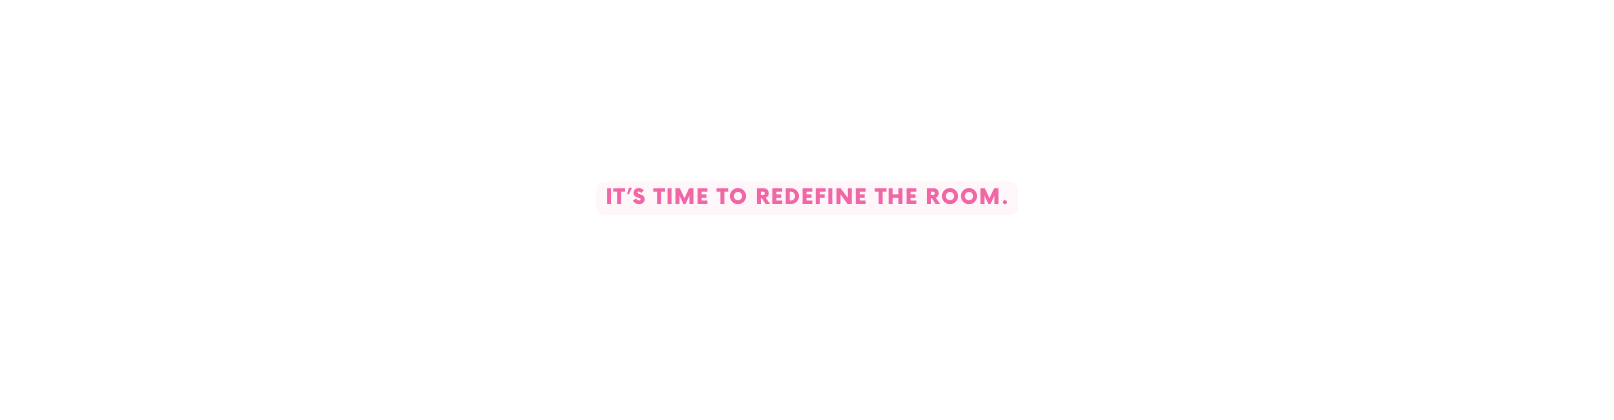 IT S TIME TO REDEFINE THE ROOM